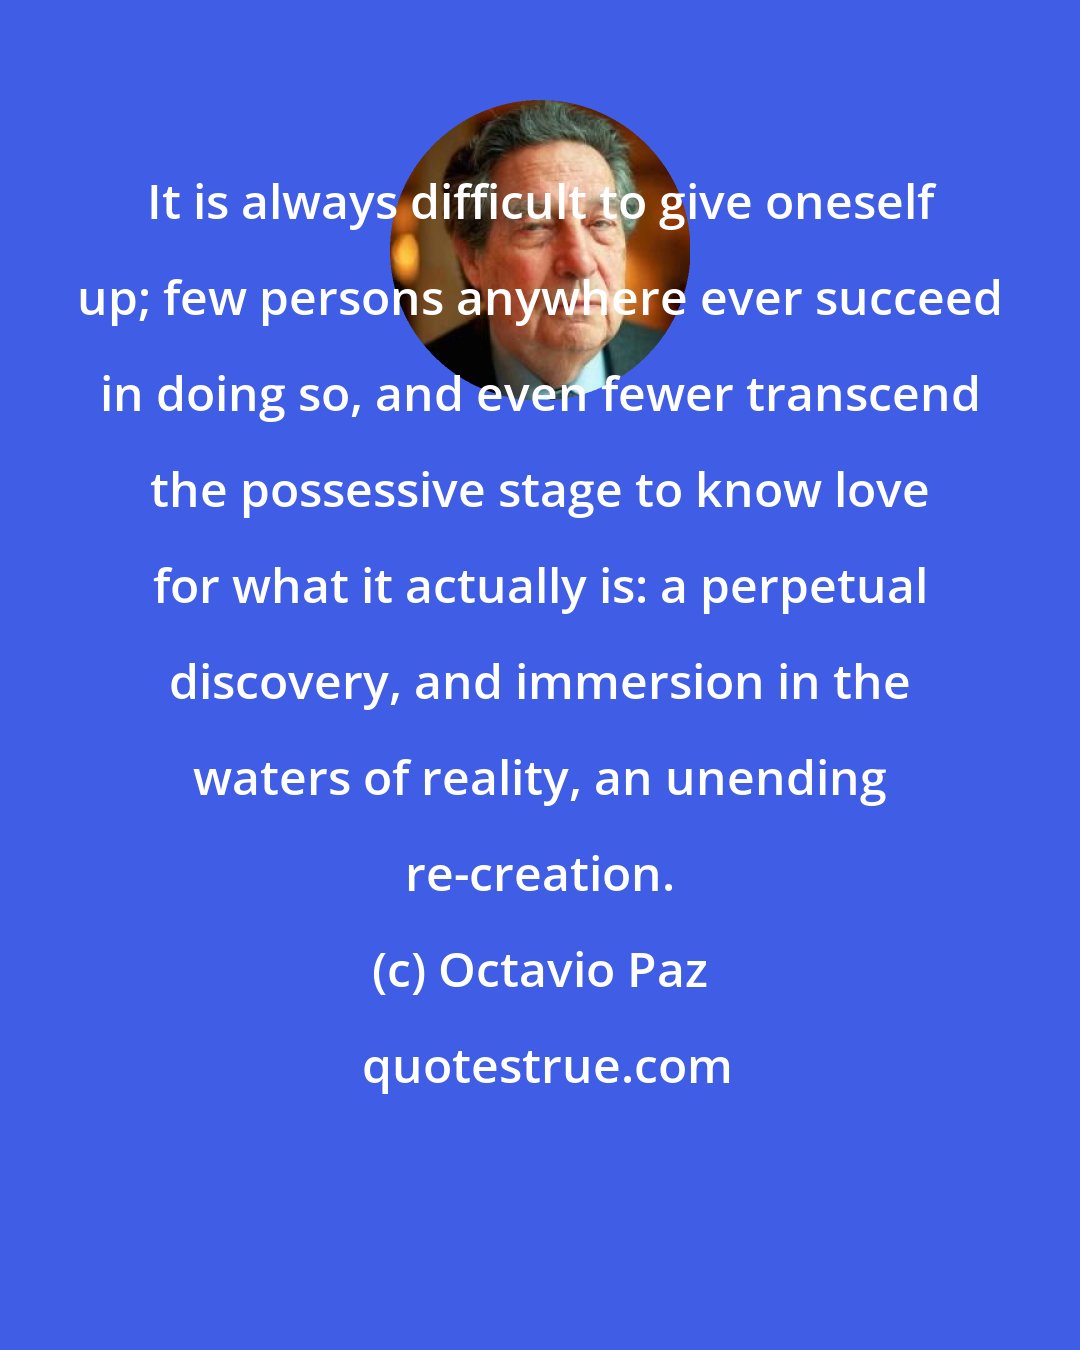 Octavio Paz: It is always difficult to give oneself up; few persons anywhere ever succeed in doing so, and even fewer transcend the possessive stage to know love for what it actually is: a perpetual discovery, and immersion in the waters of reality, an unending re-creation.